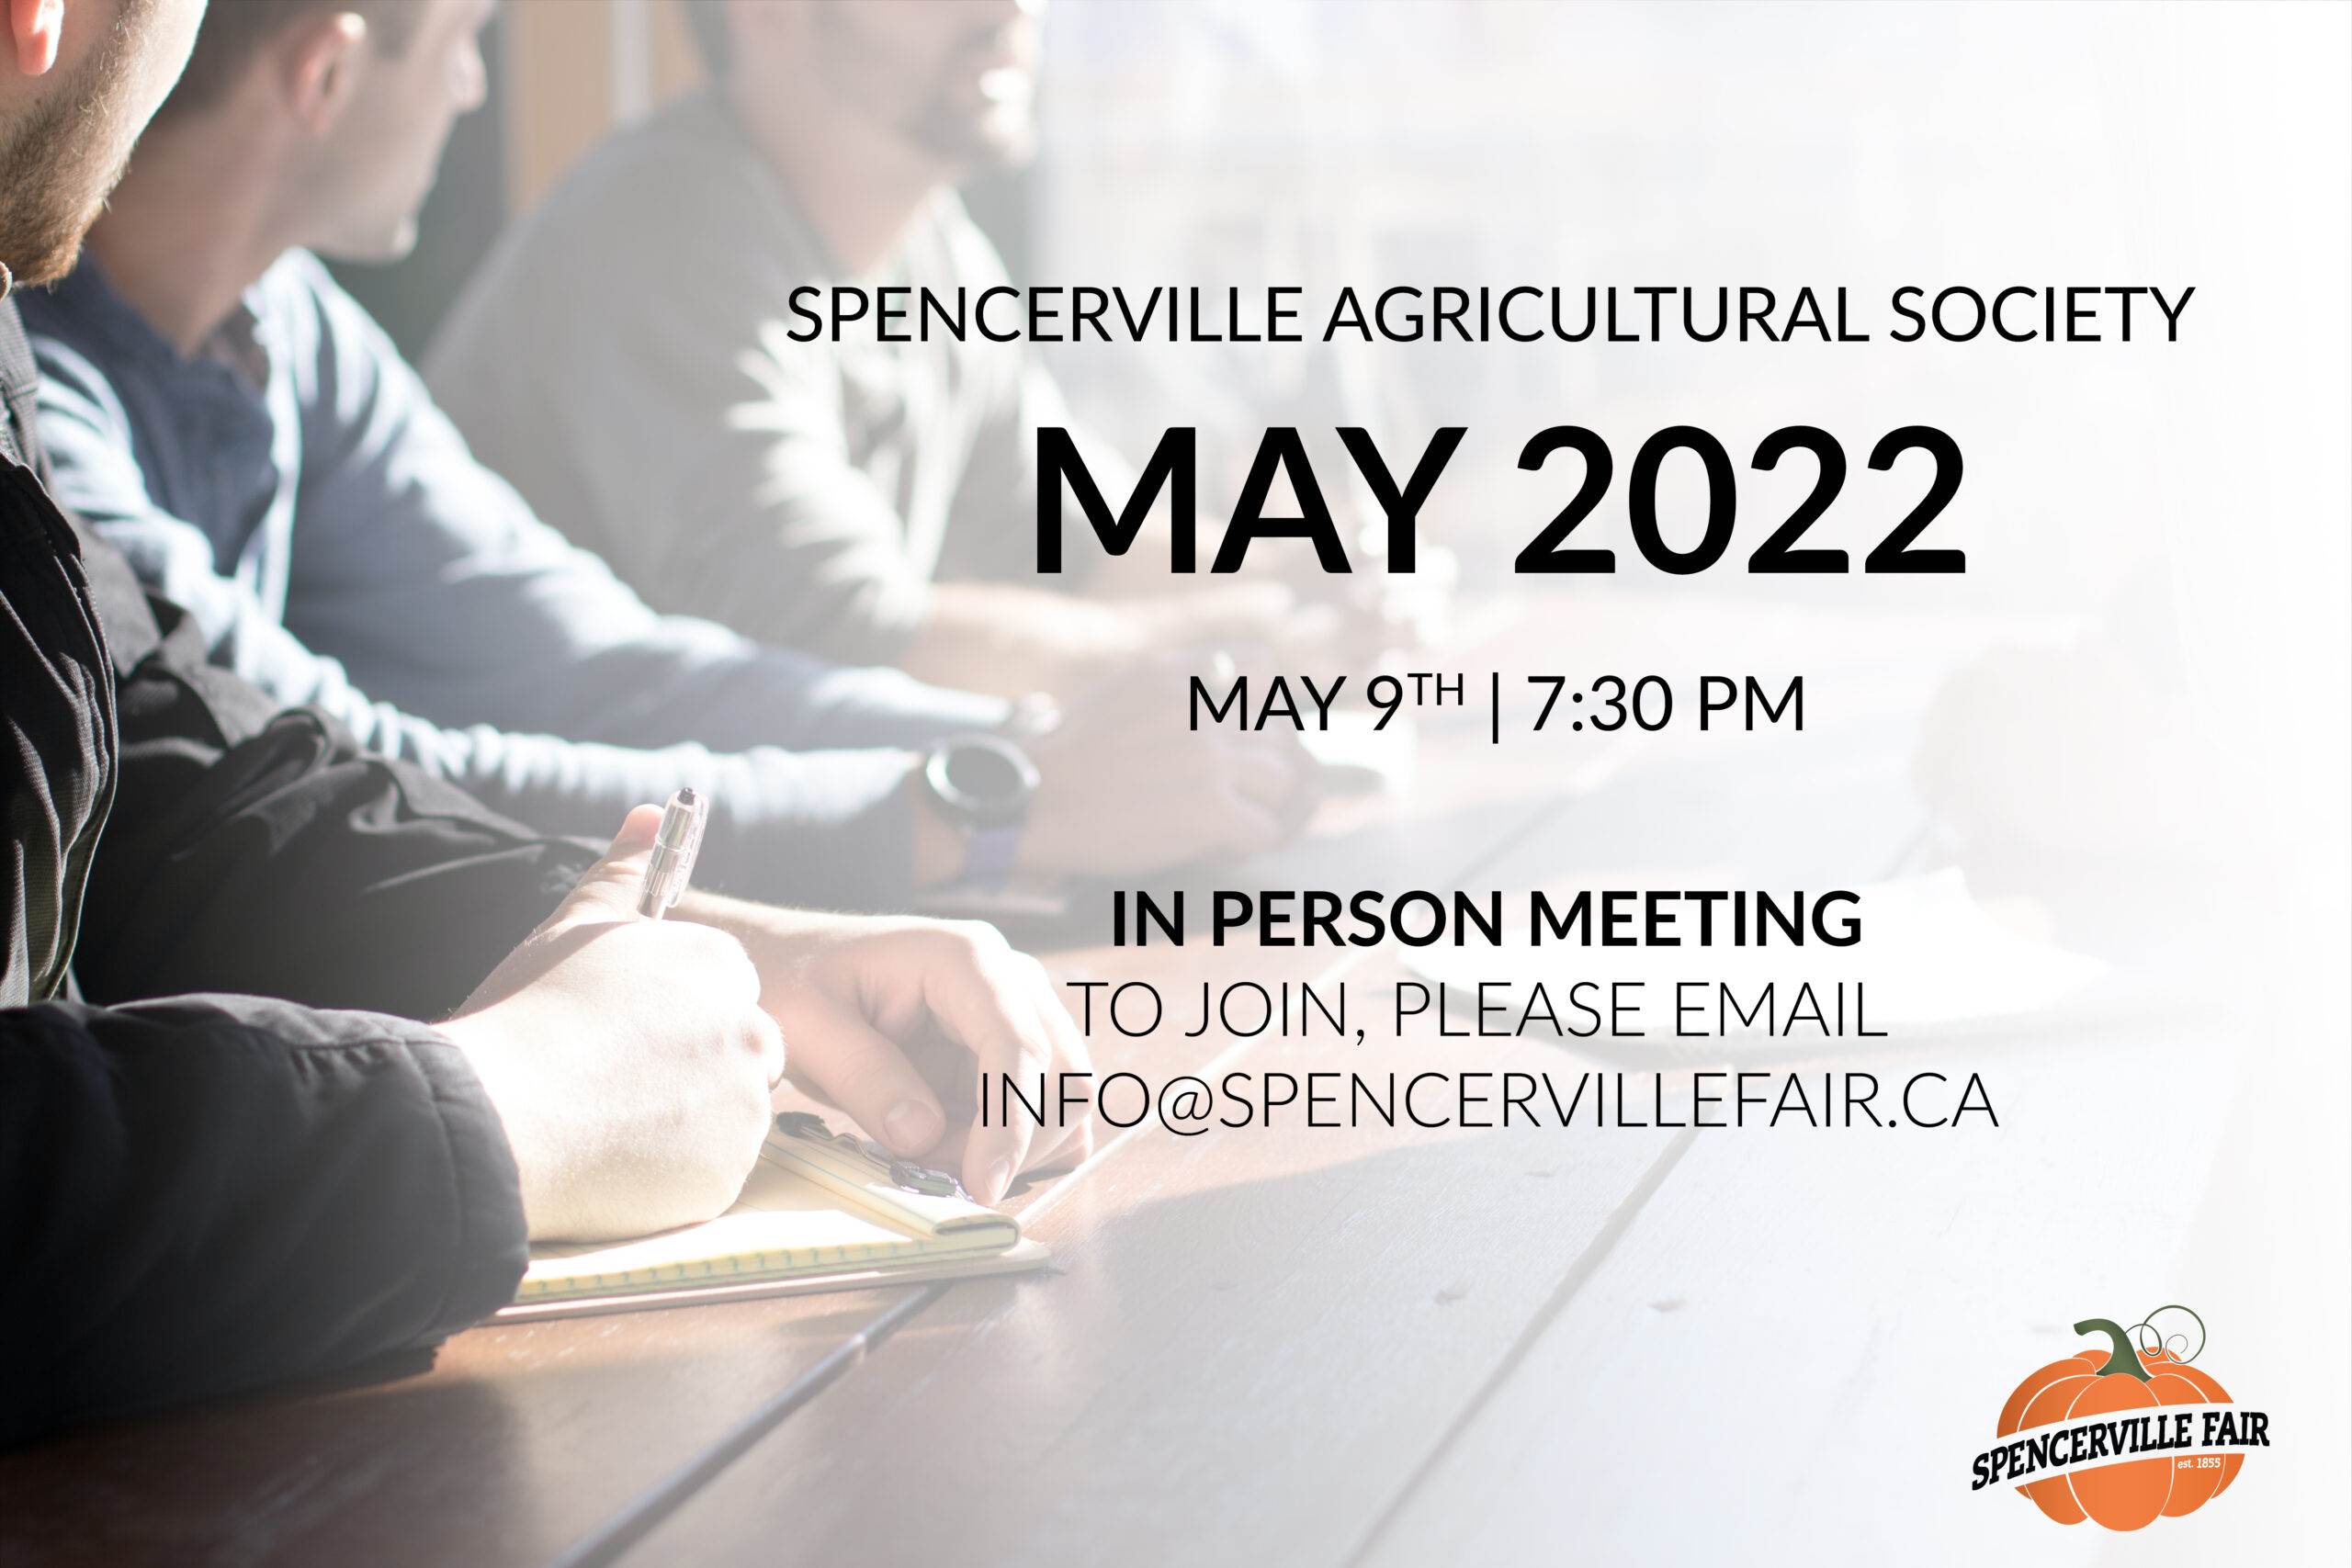 spencerville agricultural society maymeeting logo